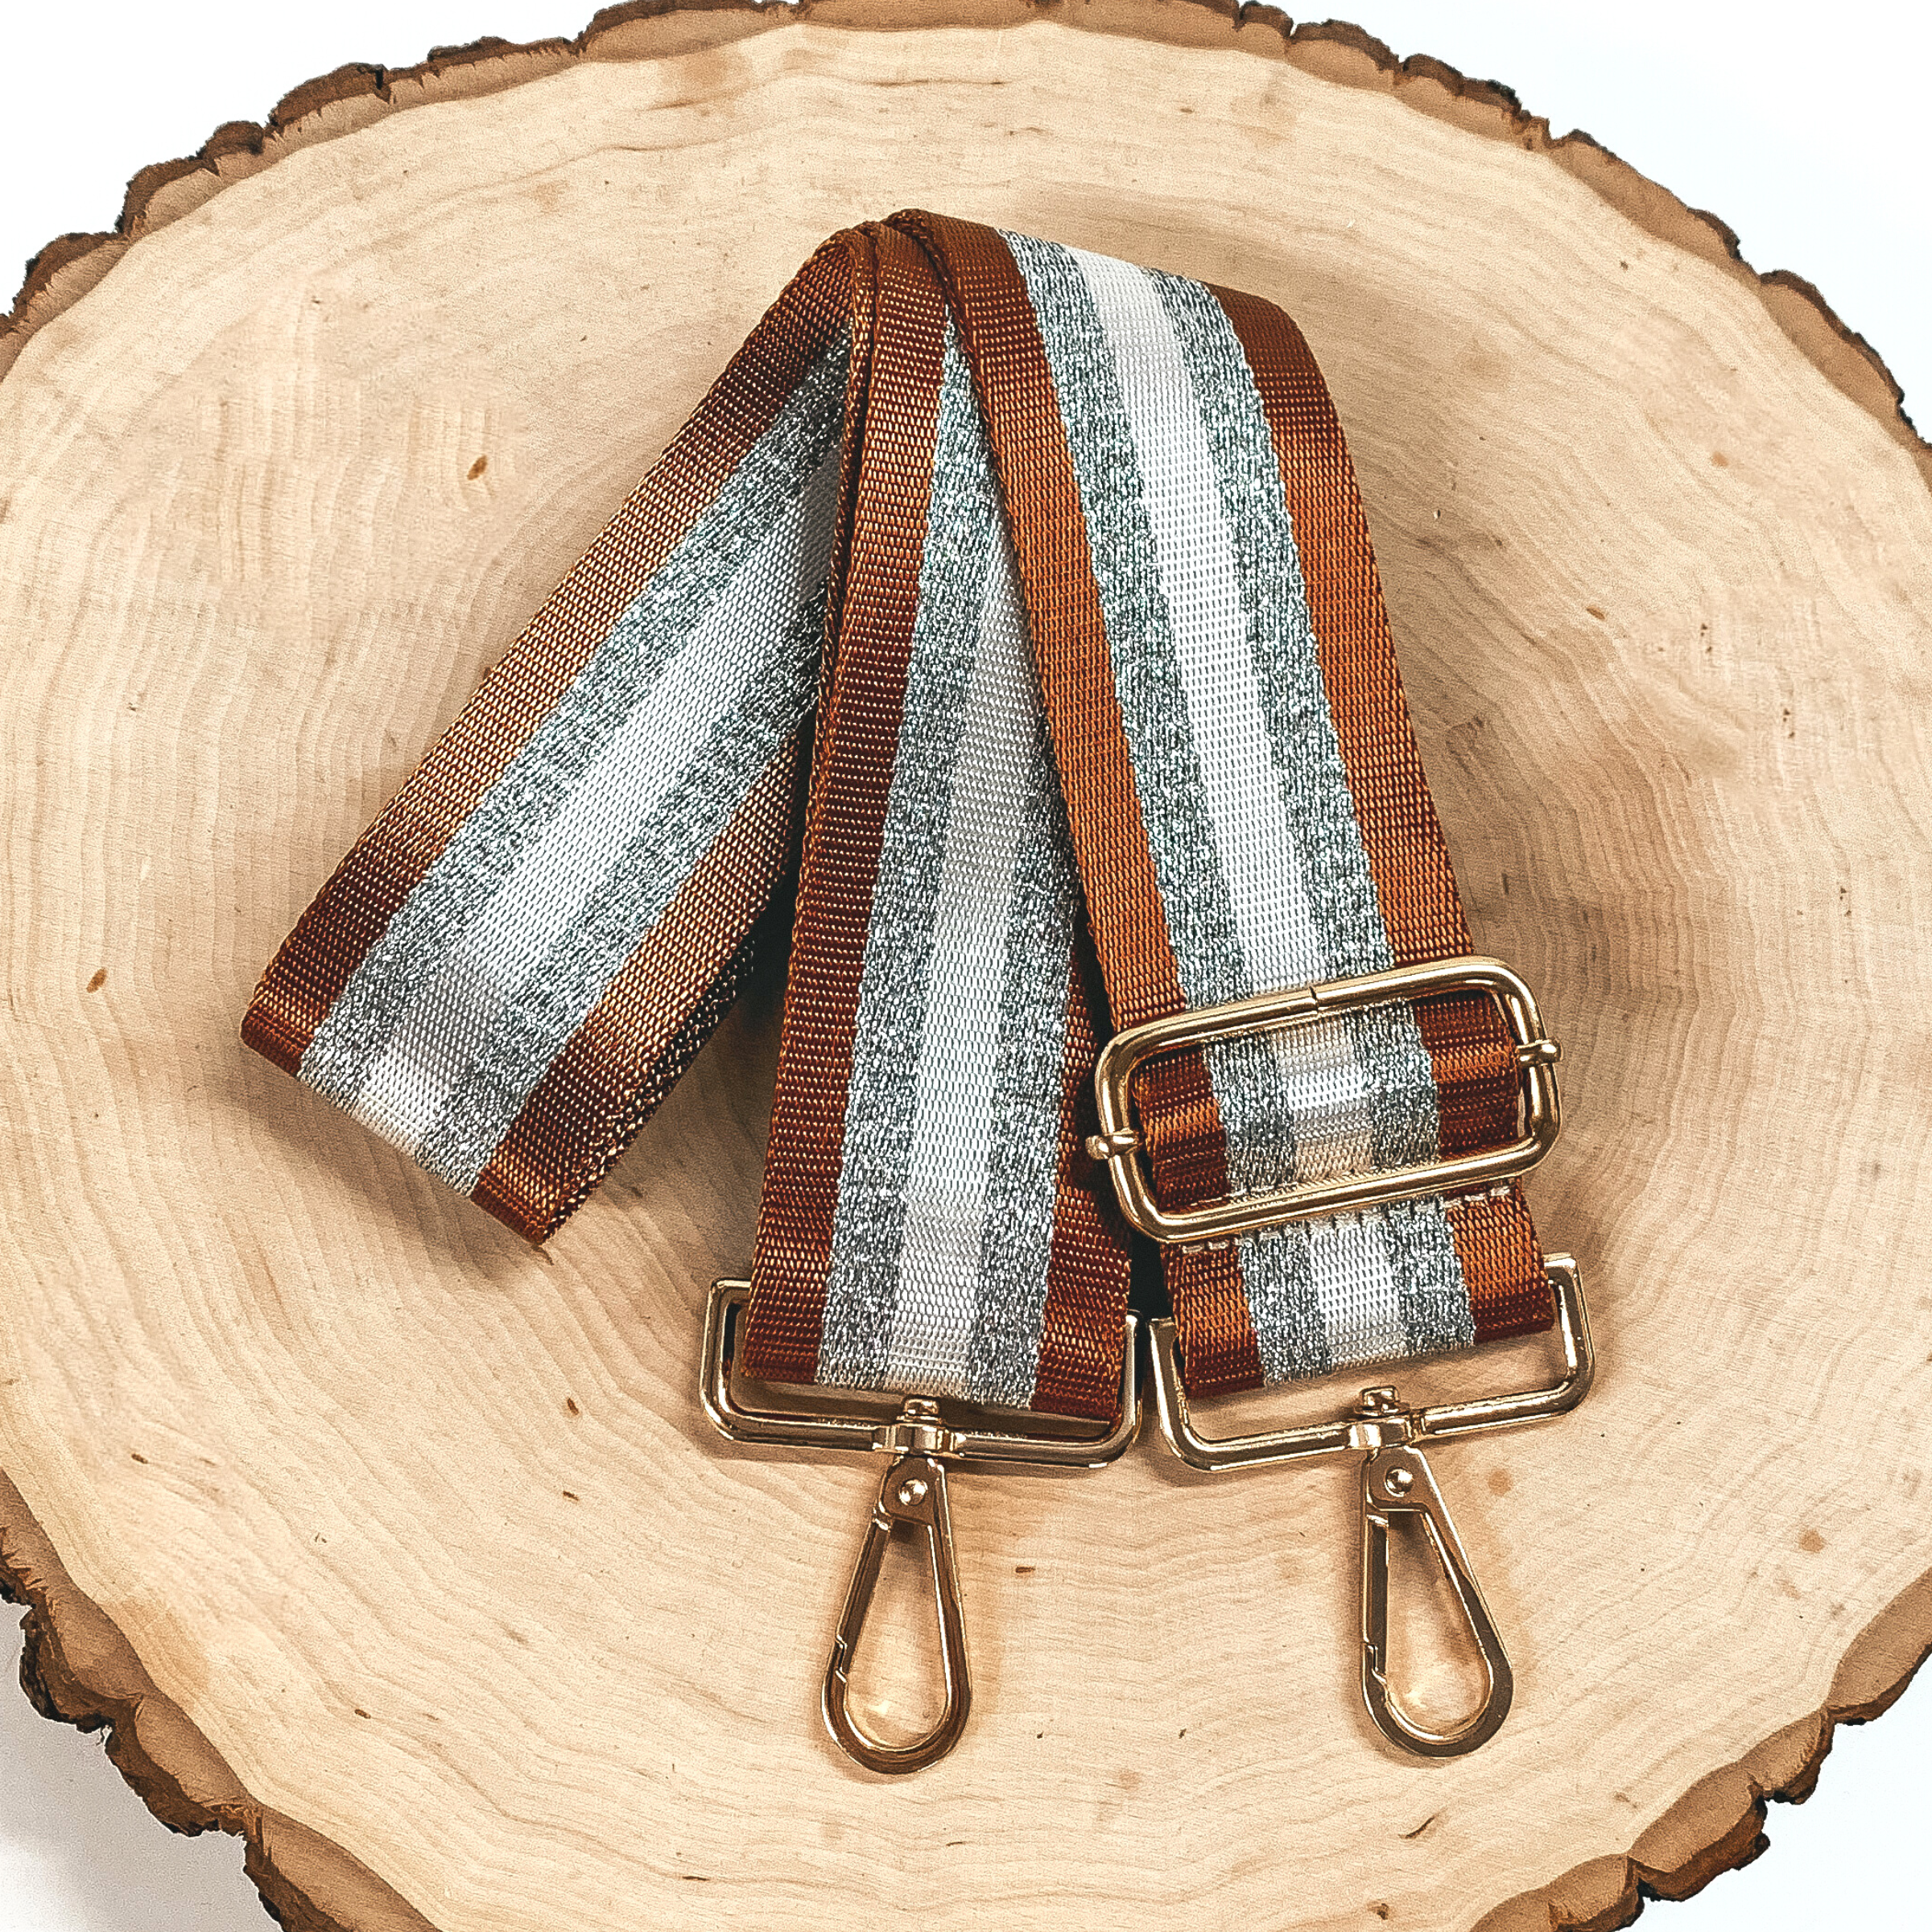 Multicolored Striped Adjustable Purse Strap in Camel Brown, White, and Silver - Giddy Up Glamour Boutique